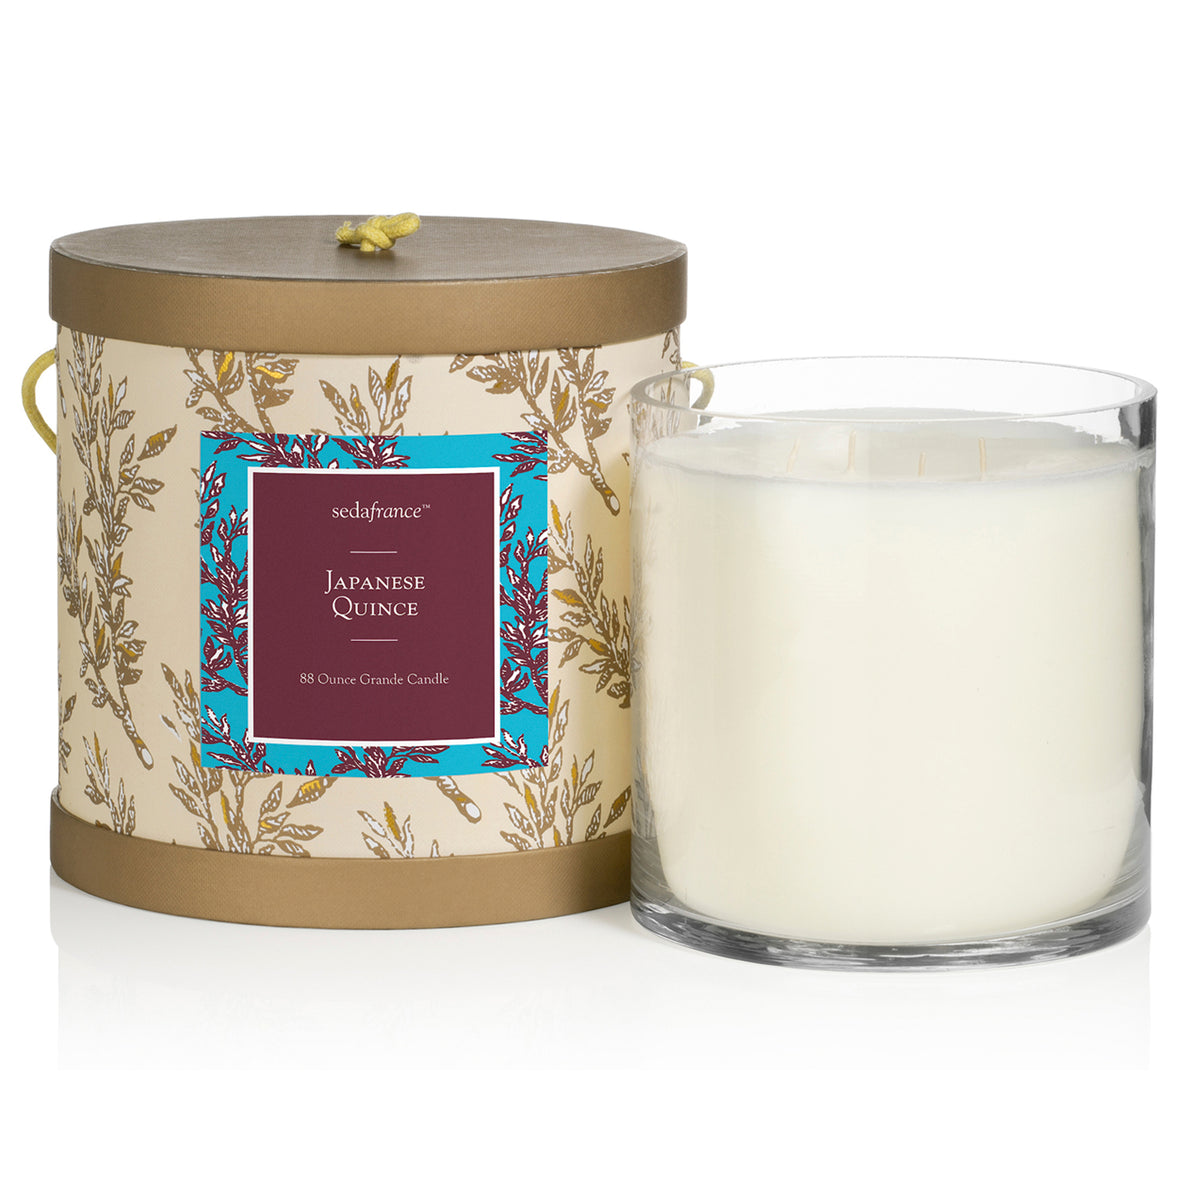 Japanese Quince Classic Toile 88 Ounce Candle